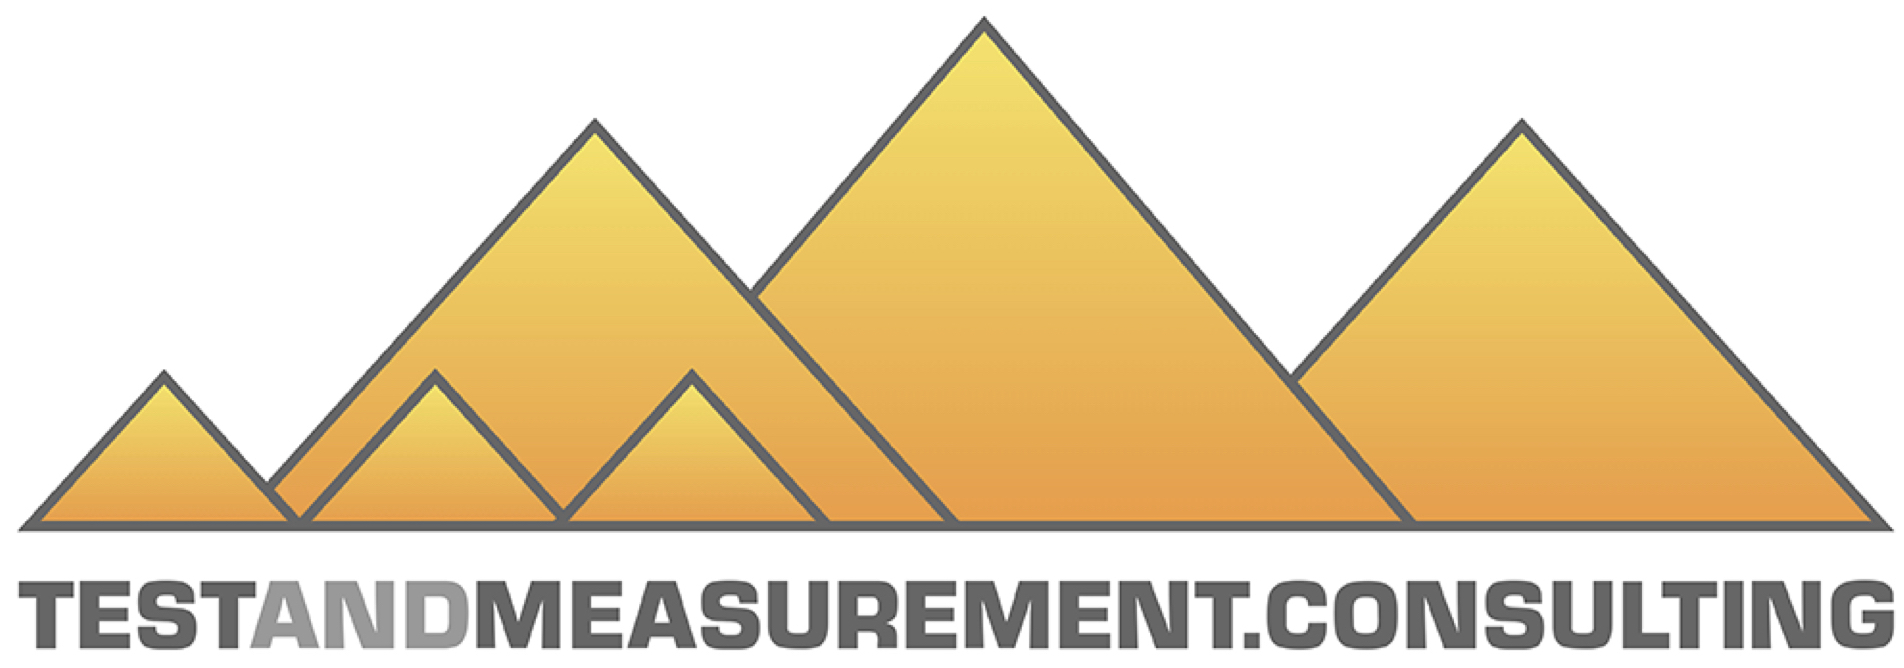 Test and Measurement Consulting